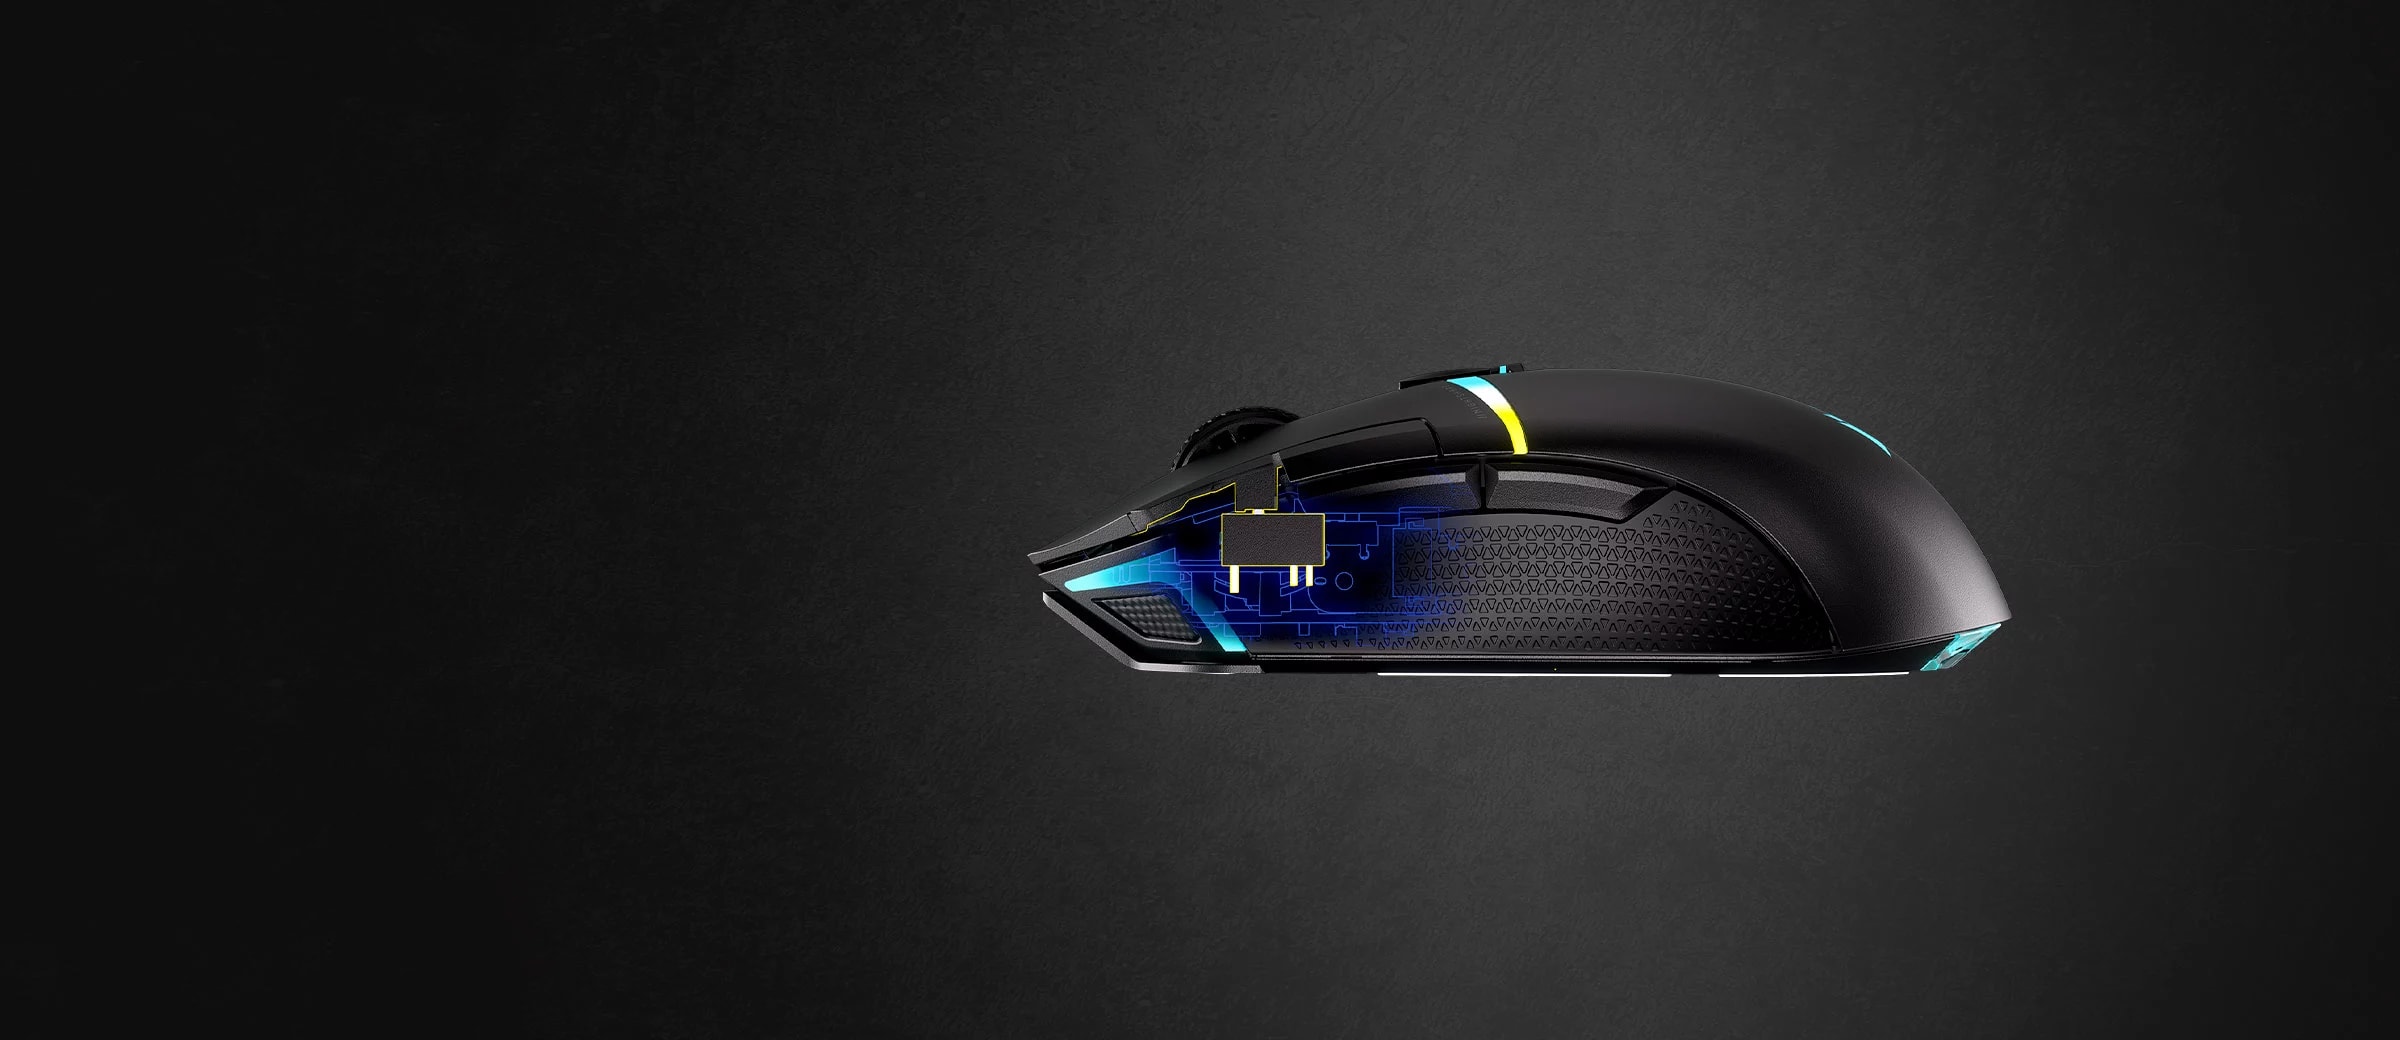 Corsair Nightsabre RGB Wireless Gaming Mouse